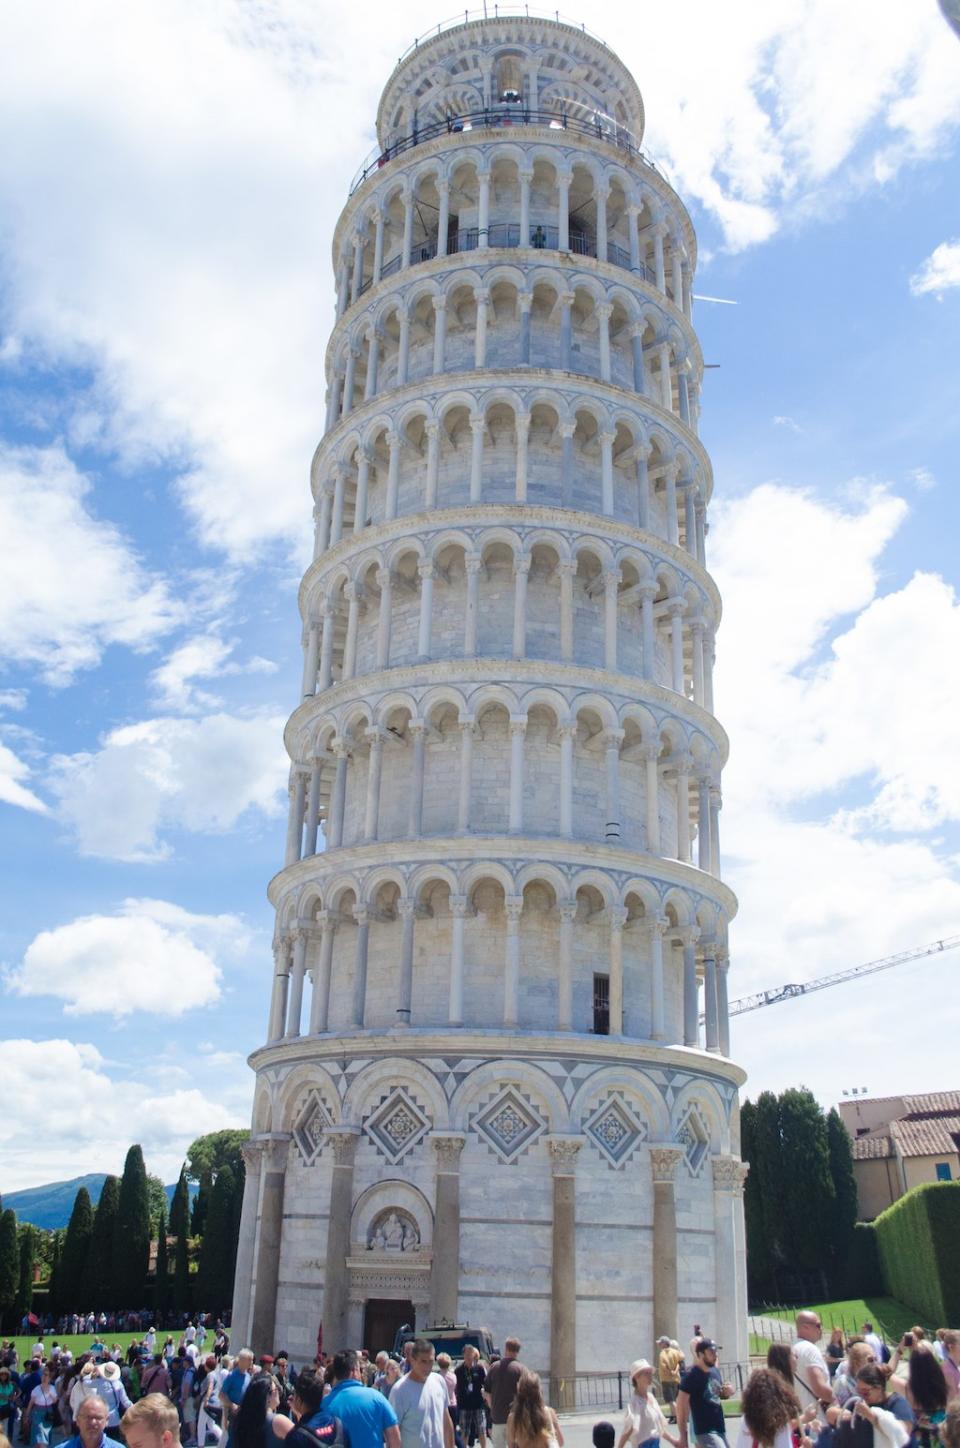 The first port of call was Livorno, Italy. A short ride inland brought us to the Leaning Tower of Pisa, where in 1589, Italian scientist Galileo Galilei experimented with gravity. <cite>Samantha Mathewson</cite>